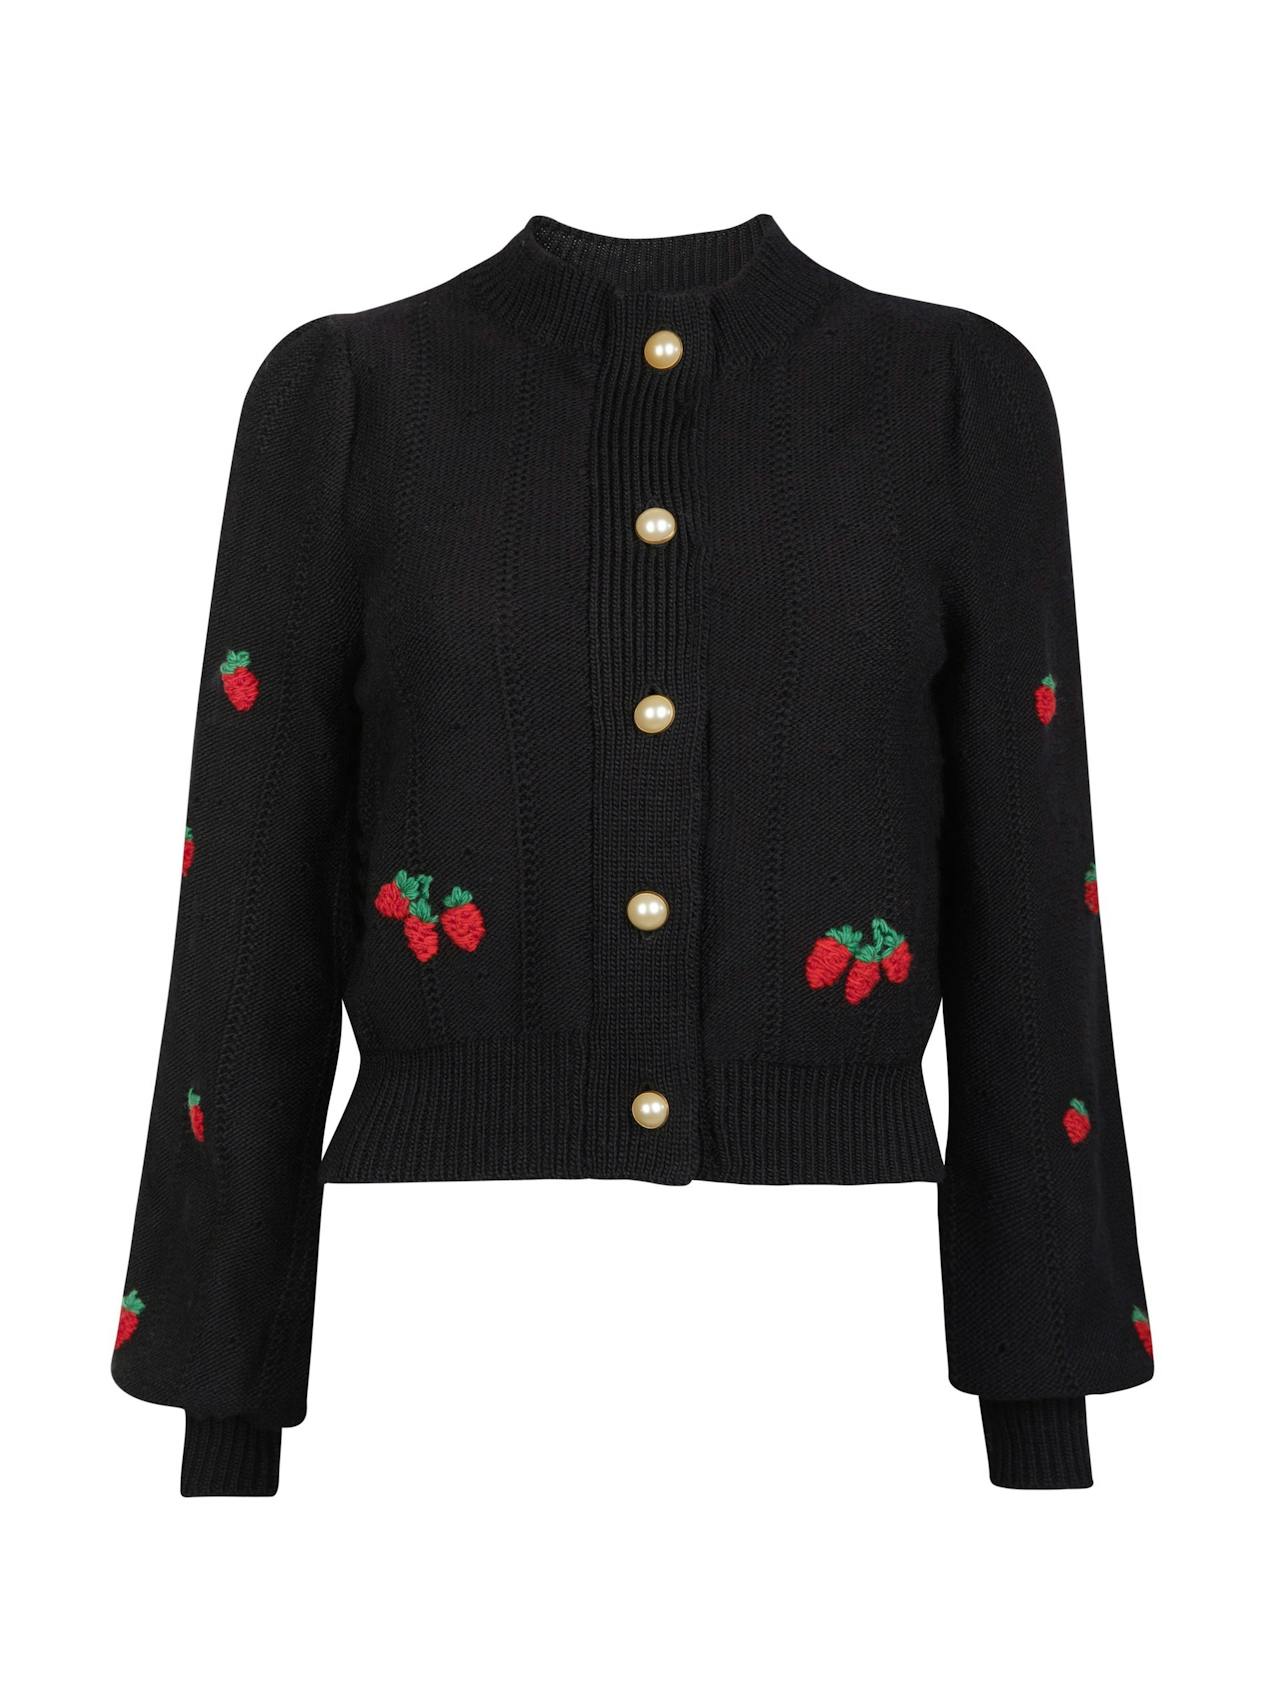 This Beulah London cardigan is the perfect addition to your wardrobe, designed in a cropped style with beautiful bishop sleeves. Collagerie.com